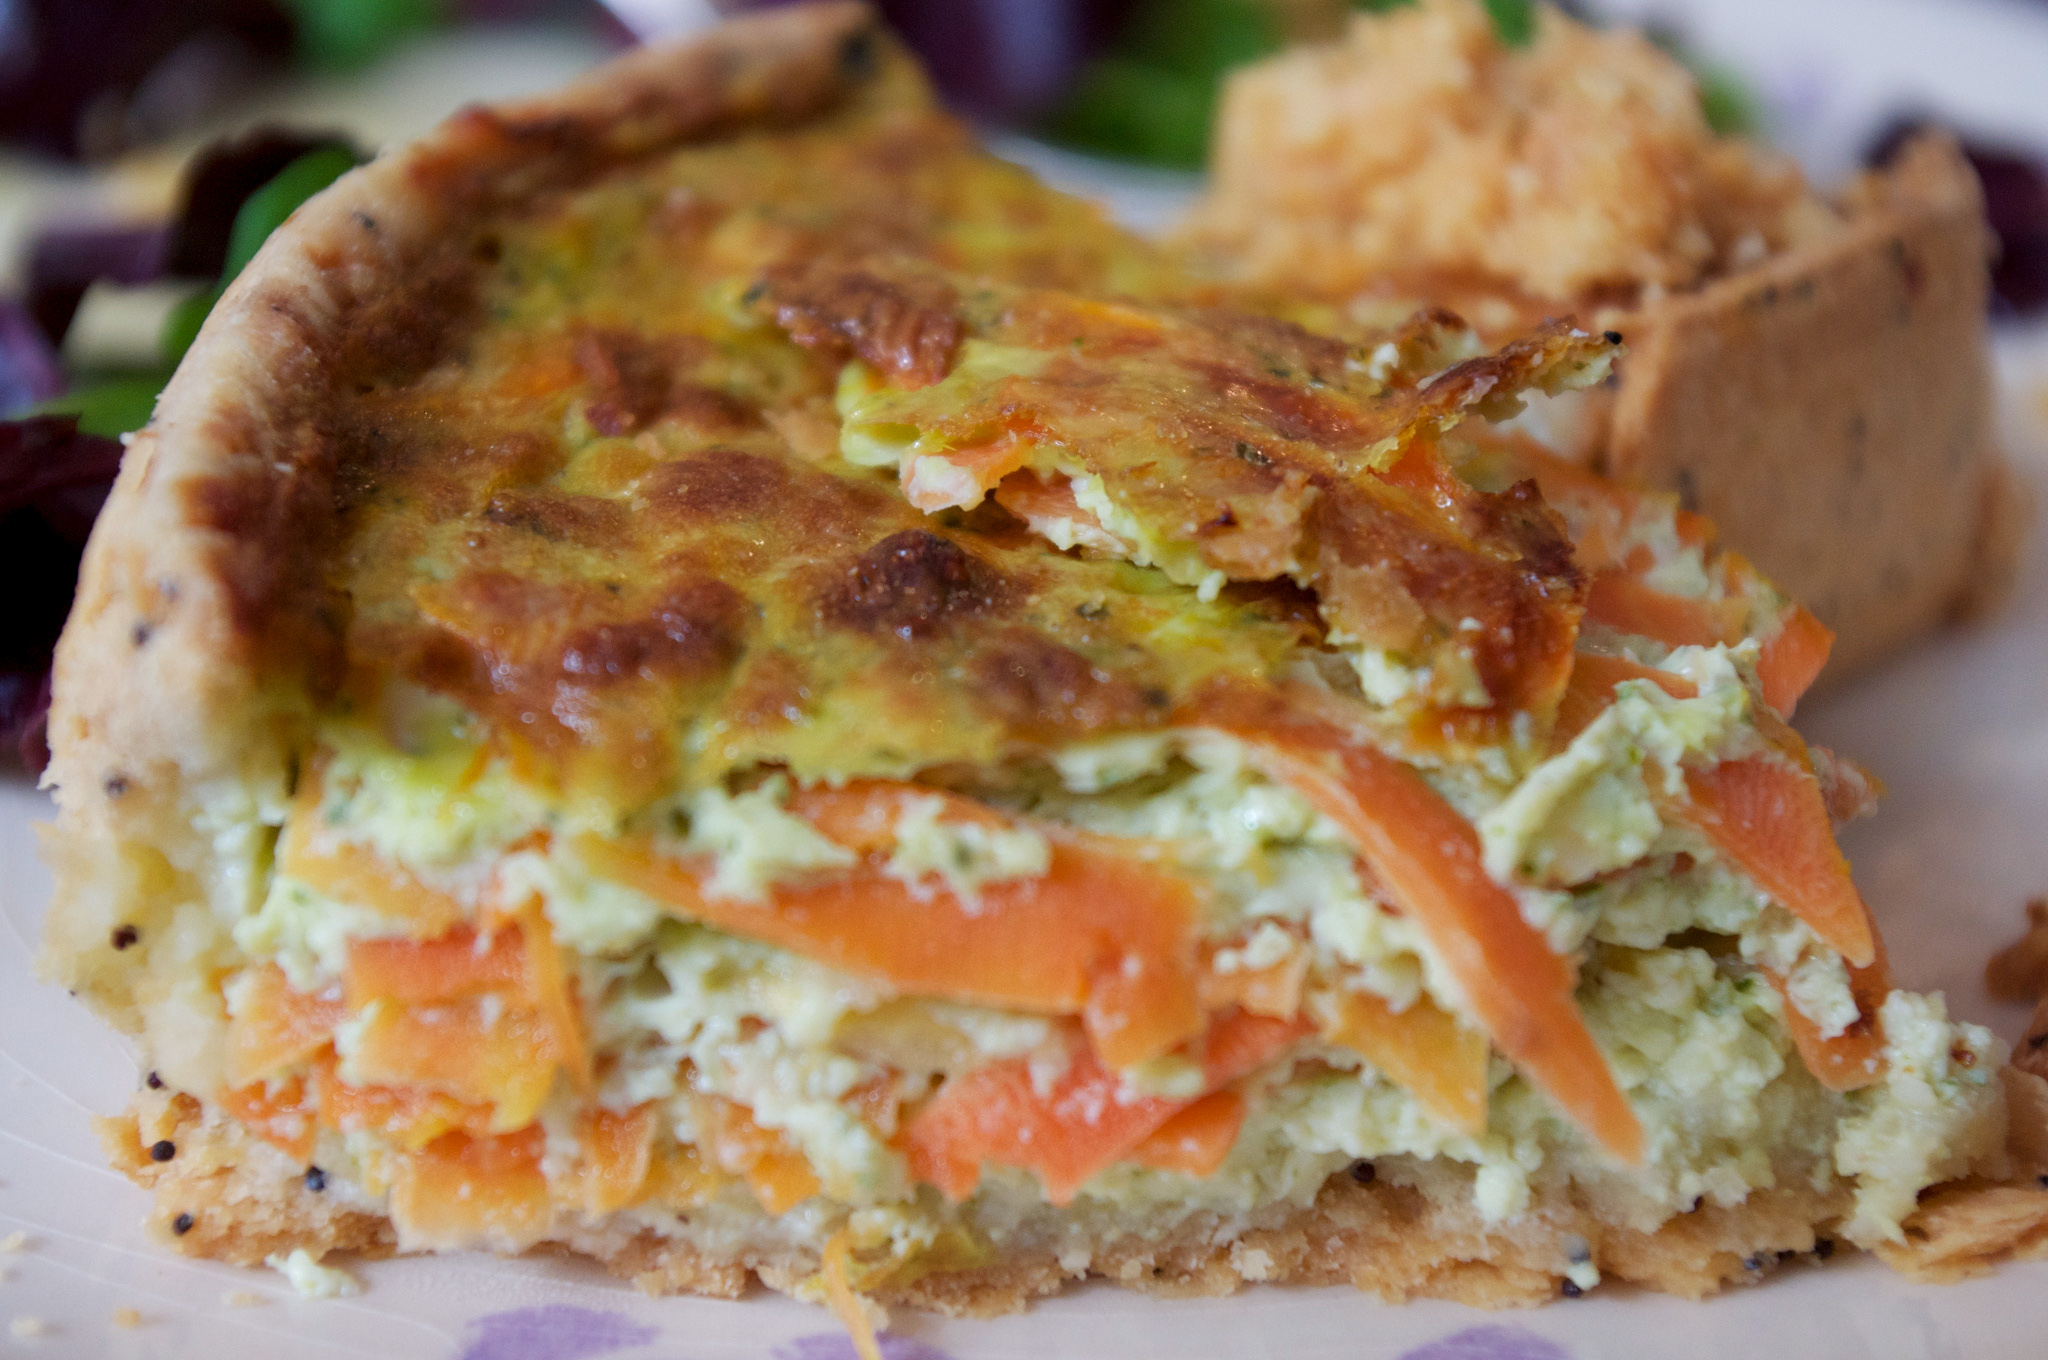 Savoury carrot tart from Tartes Kluger in Paris. Photo by alphacityguides.